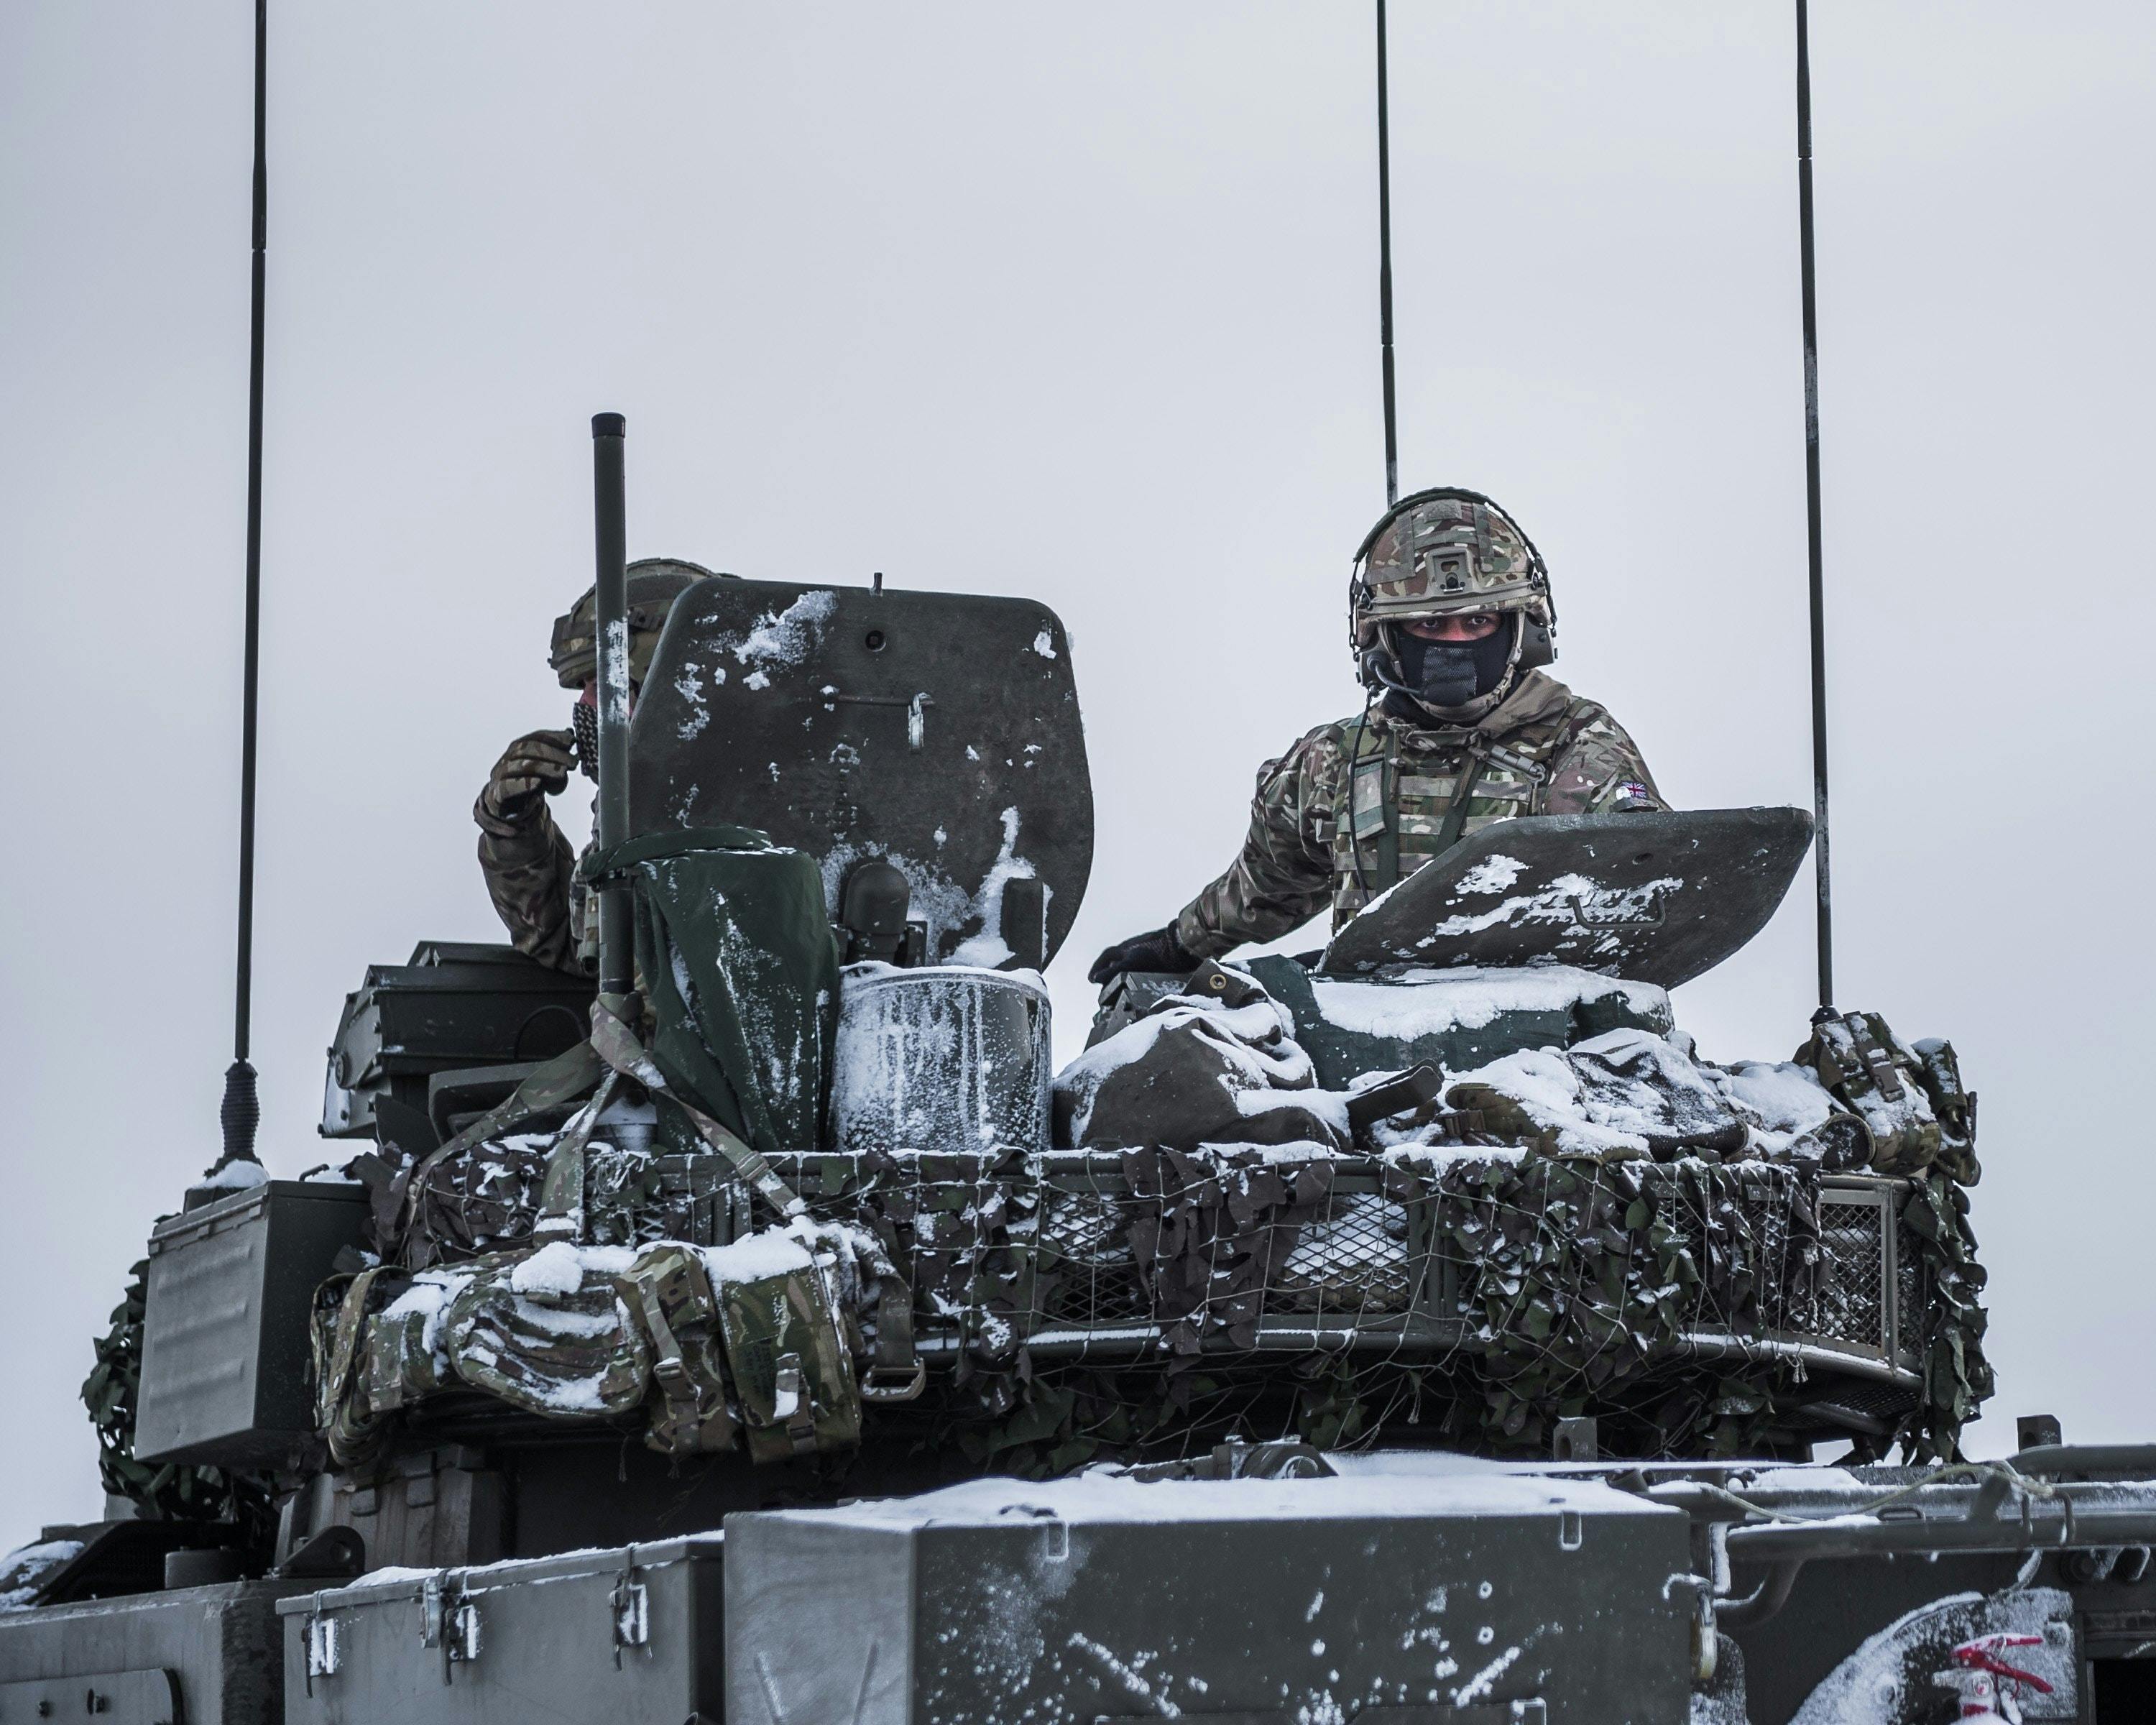 The British Army supporting NATOs Enhanced Forward Presence (eFP)